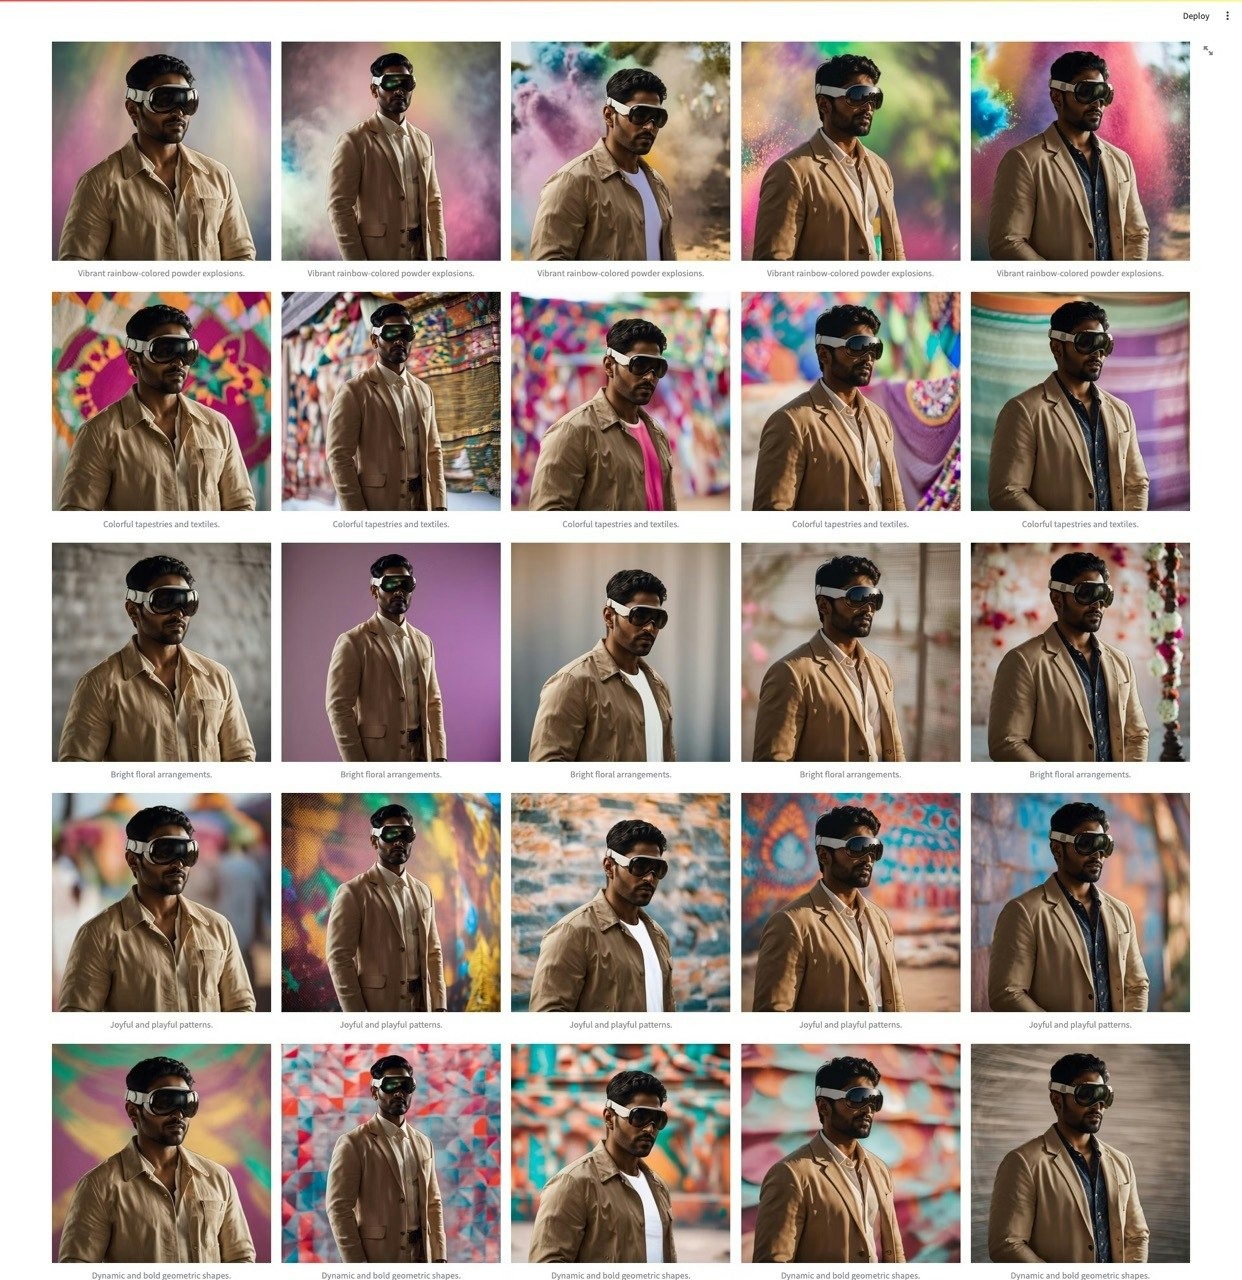 Array of images of a man wearing VR glasses in a product placement || '